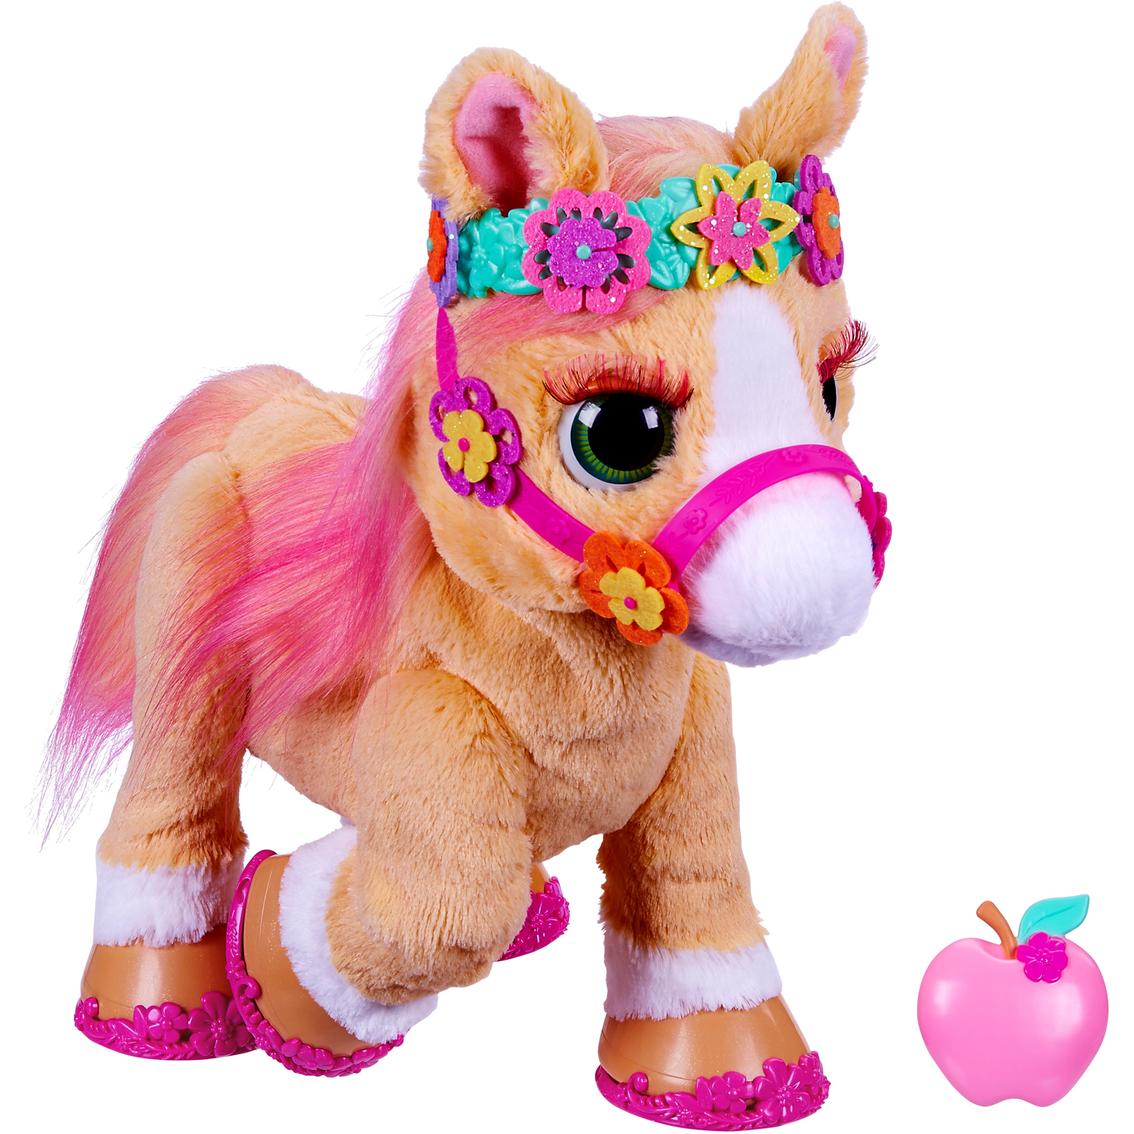 Furreal Friends Fur Real Cinnamon, My Stylin’ Pony Toy - Image 2 of 2